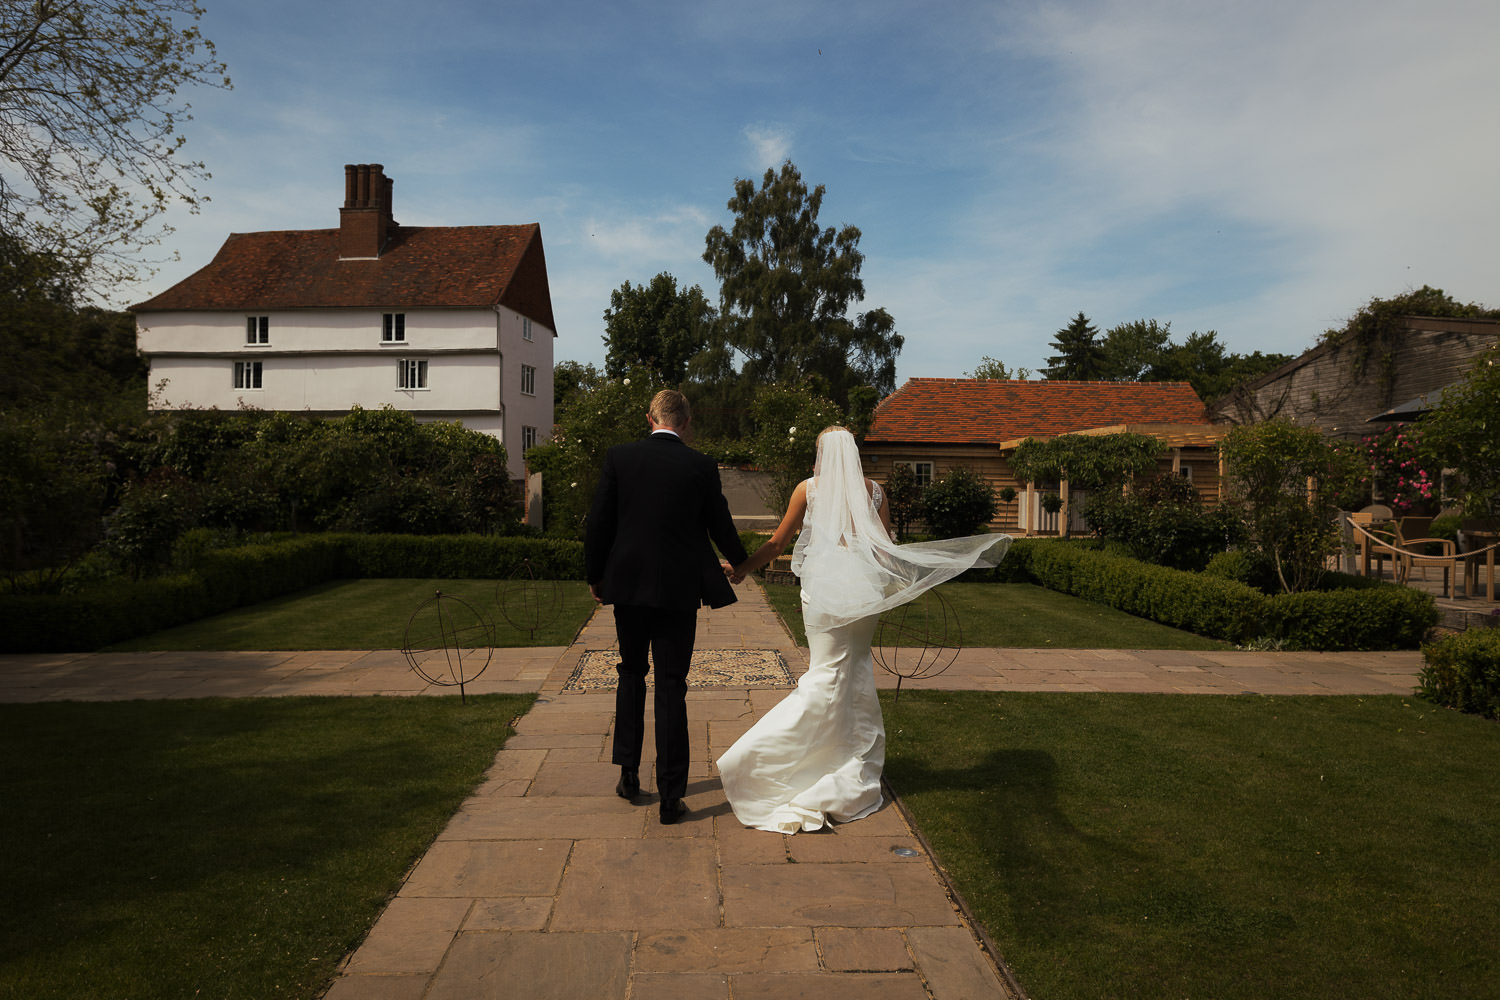 Photograph of couple straight after wedding ceremony at an outdoor wedding venue in Essex. A sunny day with blue skies. The bride is wearing a dress called Jack from Made With Love, from Halo & Wren. The groom is wearing a suit from The Grooms Room. Houchins wedding photography in the summer.